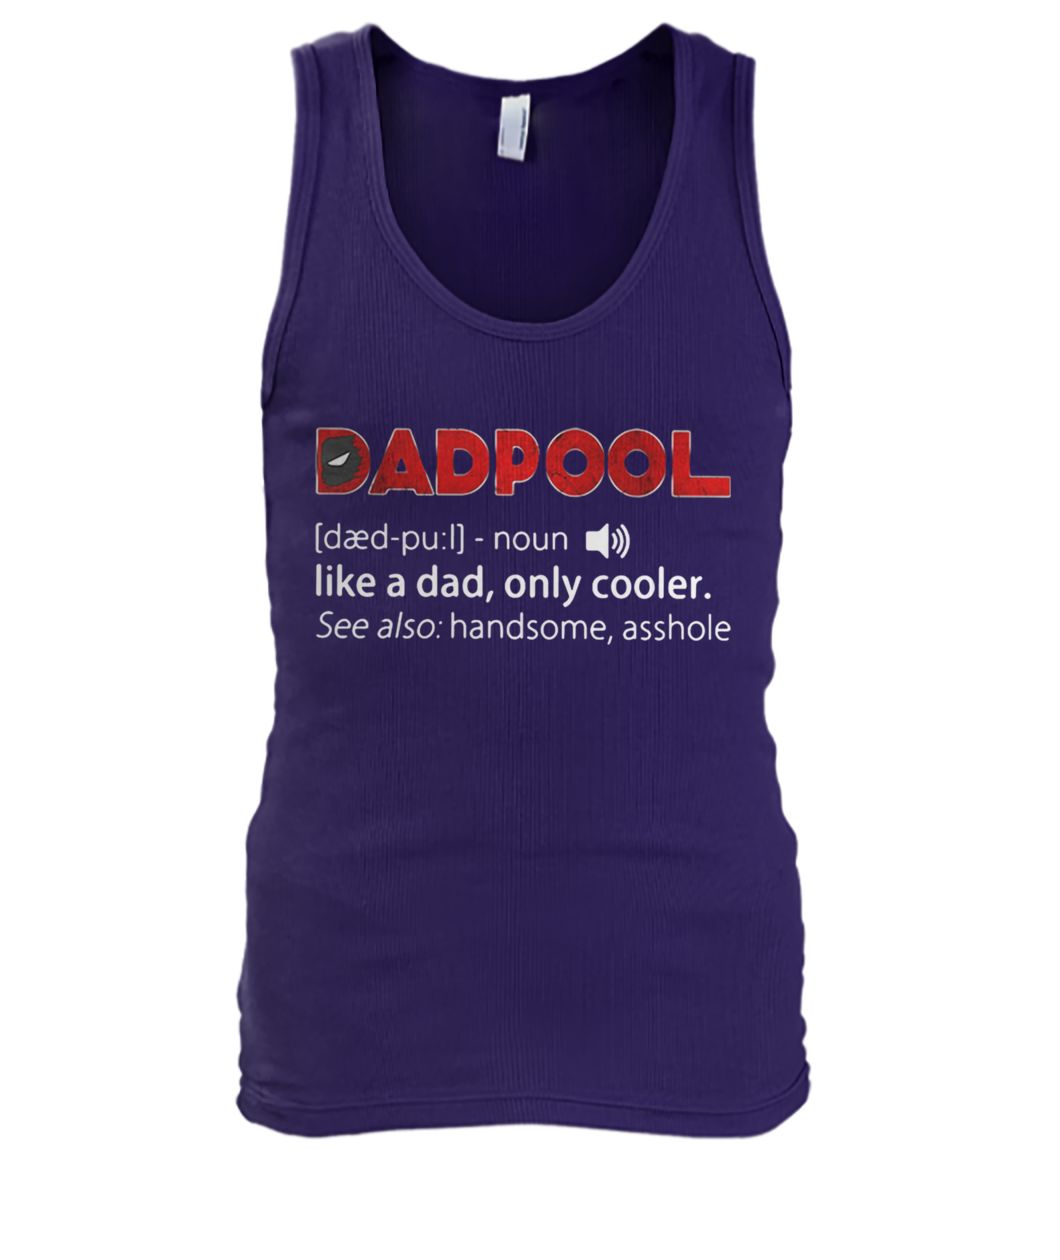 Dadpool definition meaning like a dad only cooler see also handsome asshole men's tank top